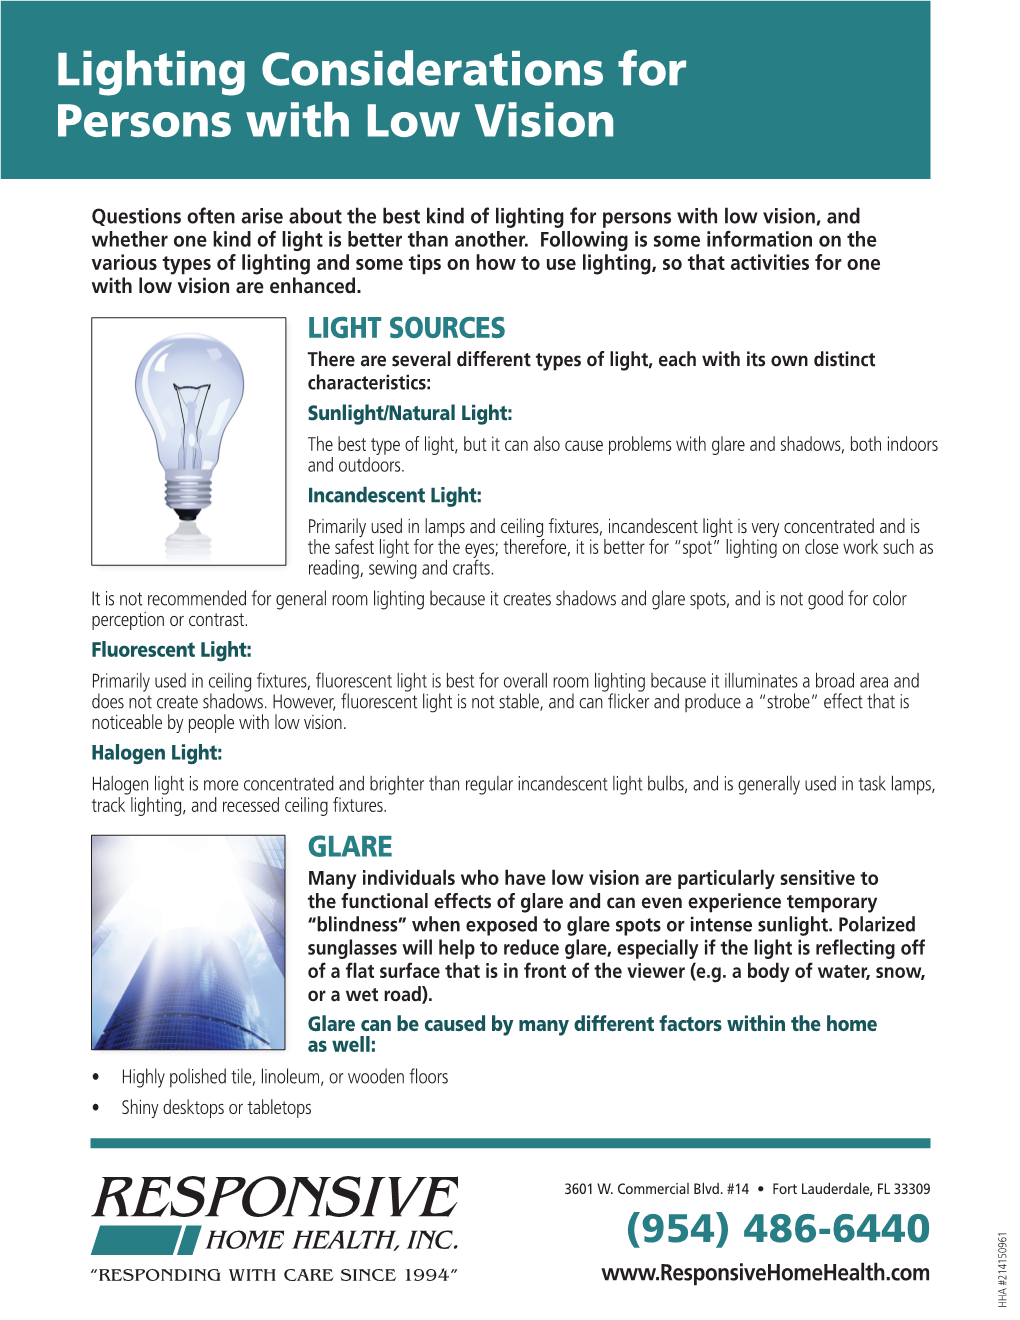 Lighting Considerations for Persons with Low Vision